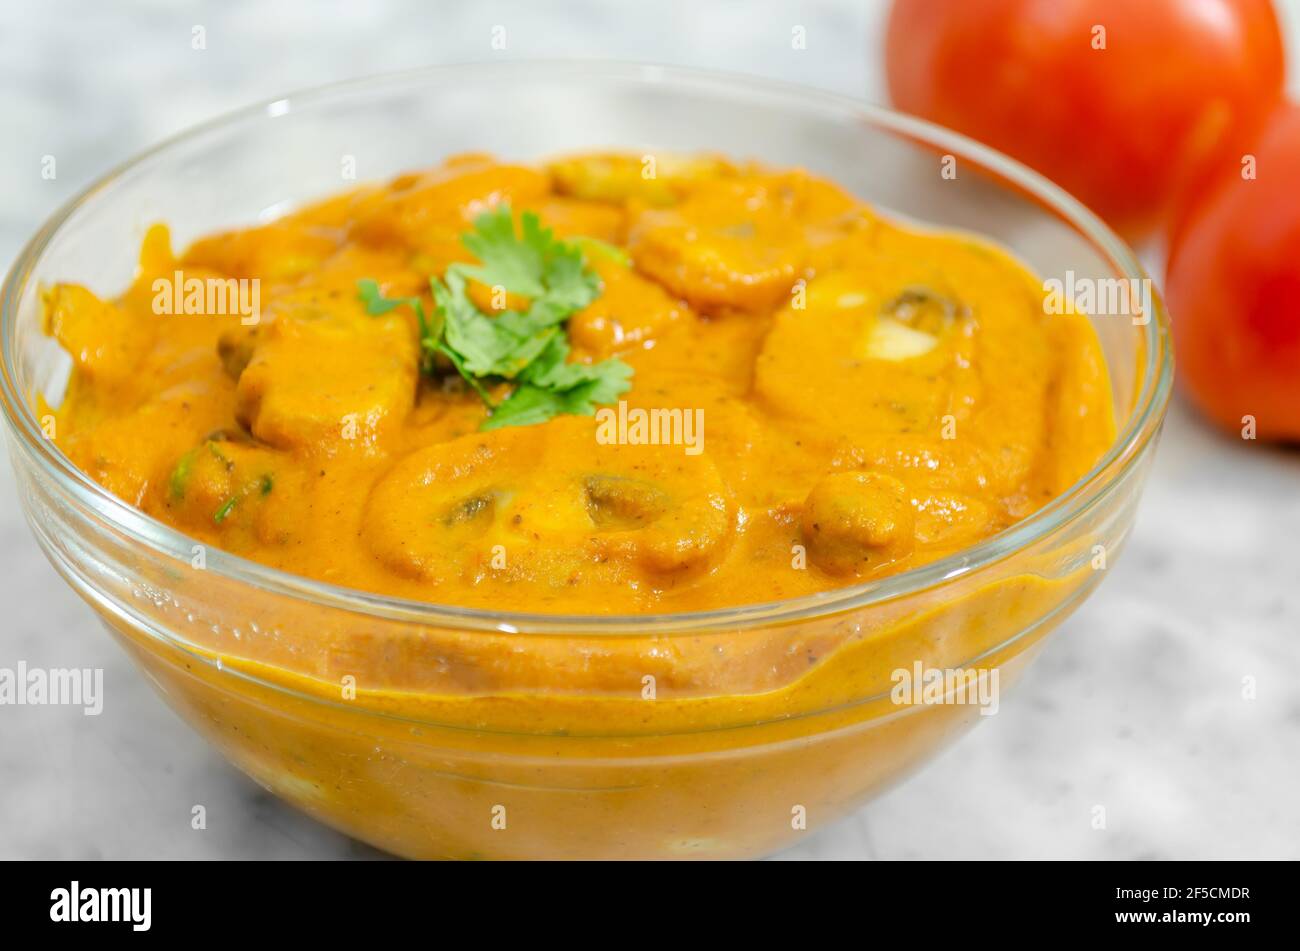 Closeup of A very tasty Mushroom Masala in a glass bowl garnished with coriander leaves and red tomatoes in the background Stock Photo